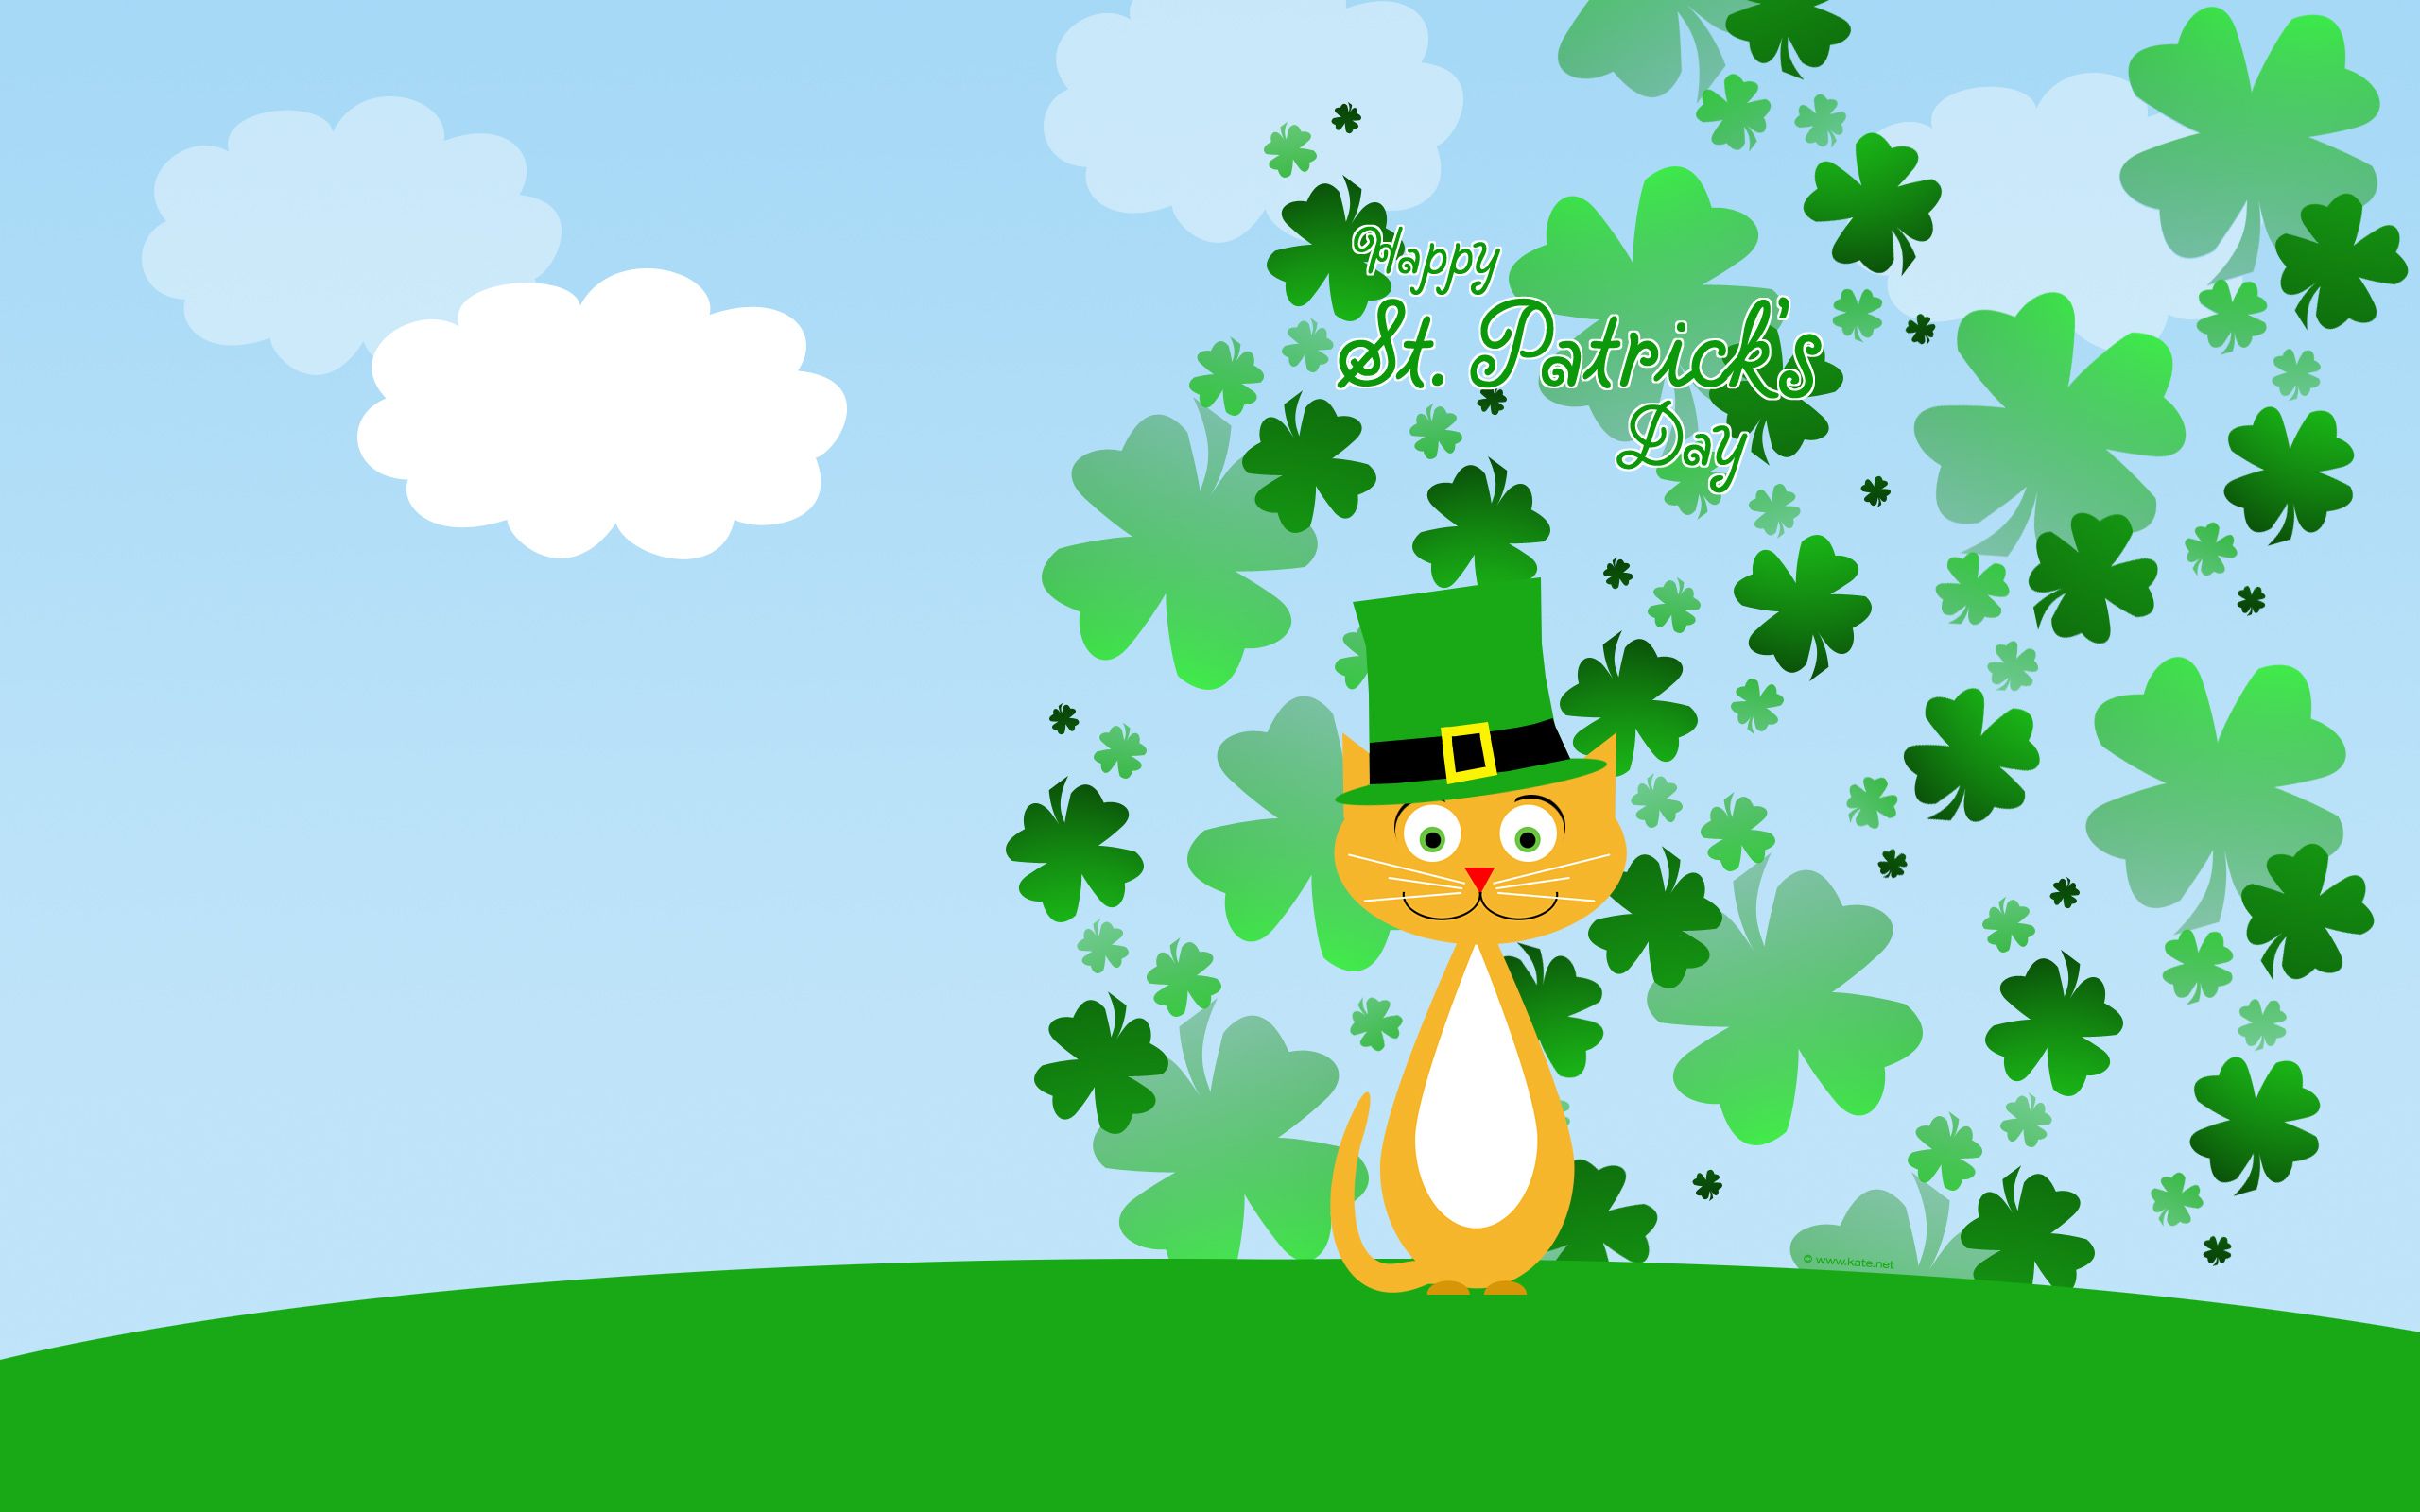 St. Patrick's Day Wallpapers by Kate.net